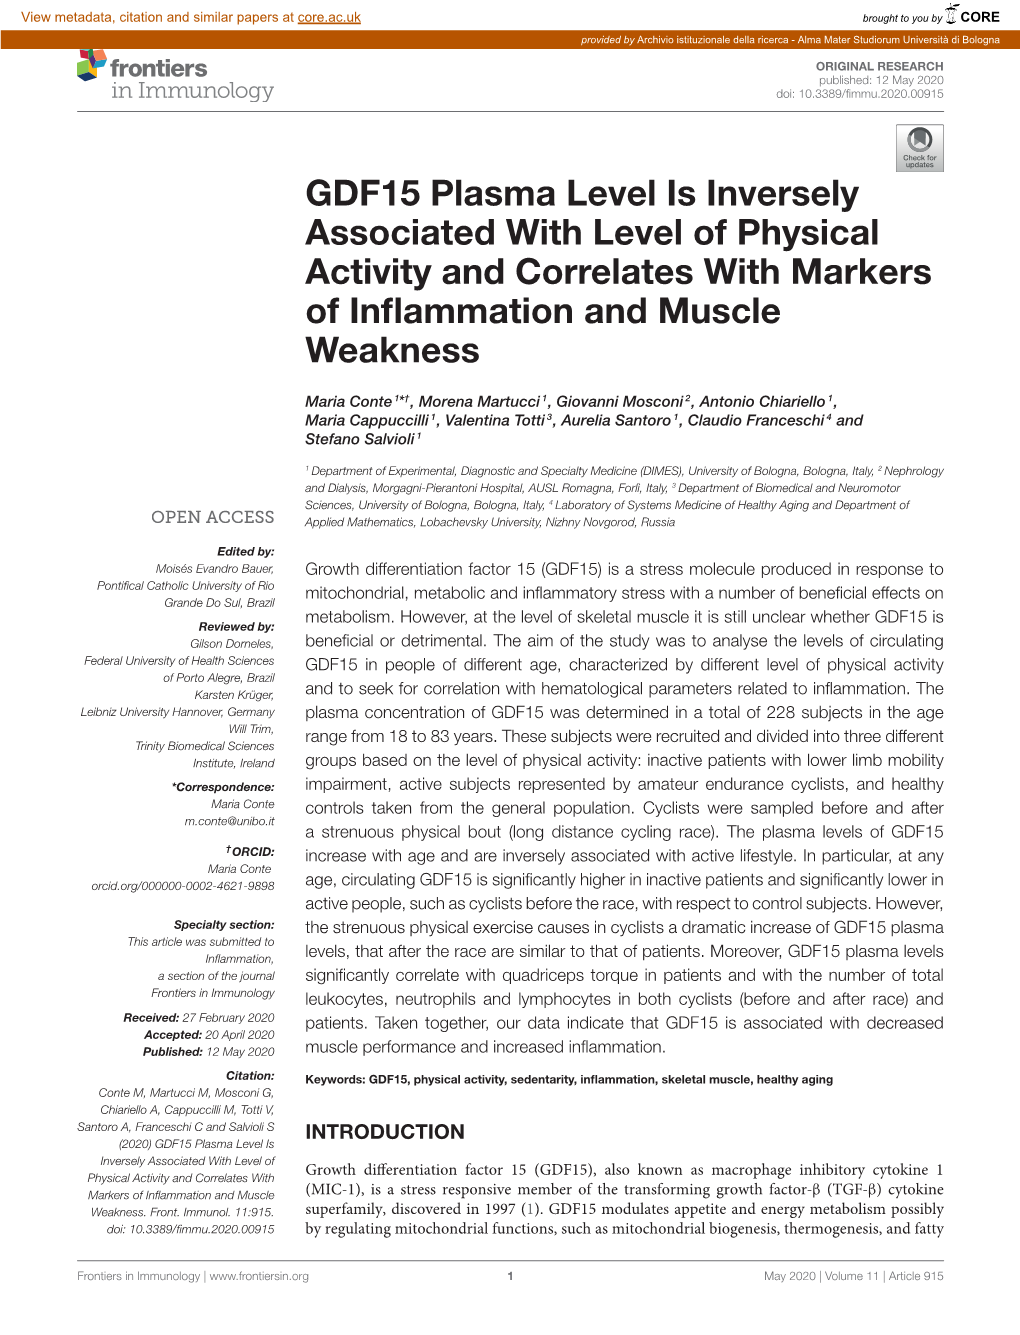 GDF15 Plasma Level Is Inversely Associated with Level of Physical Activity and Correlates with Markers of Inflammation and Muscl